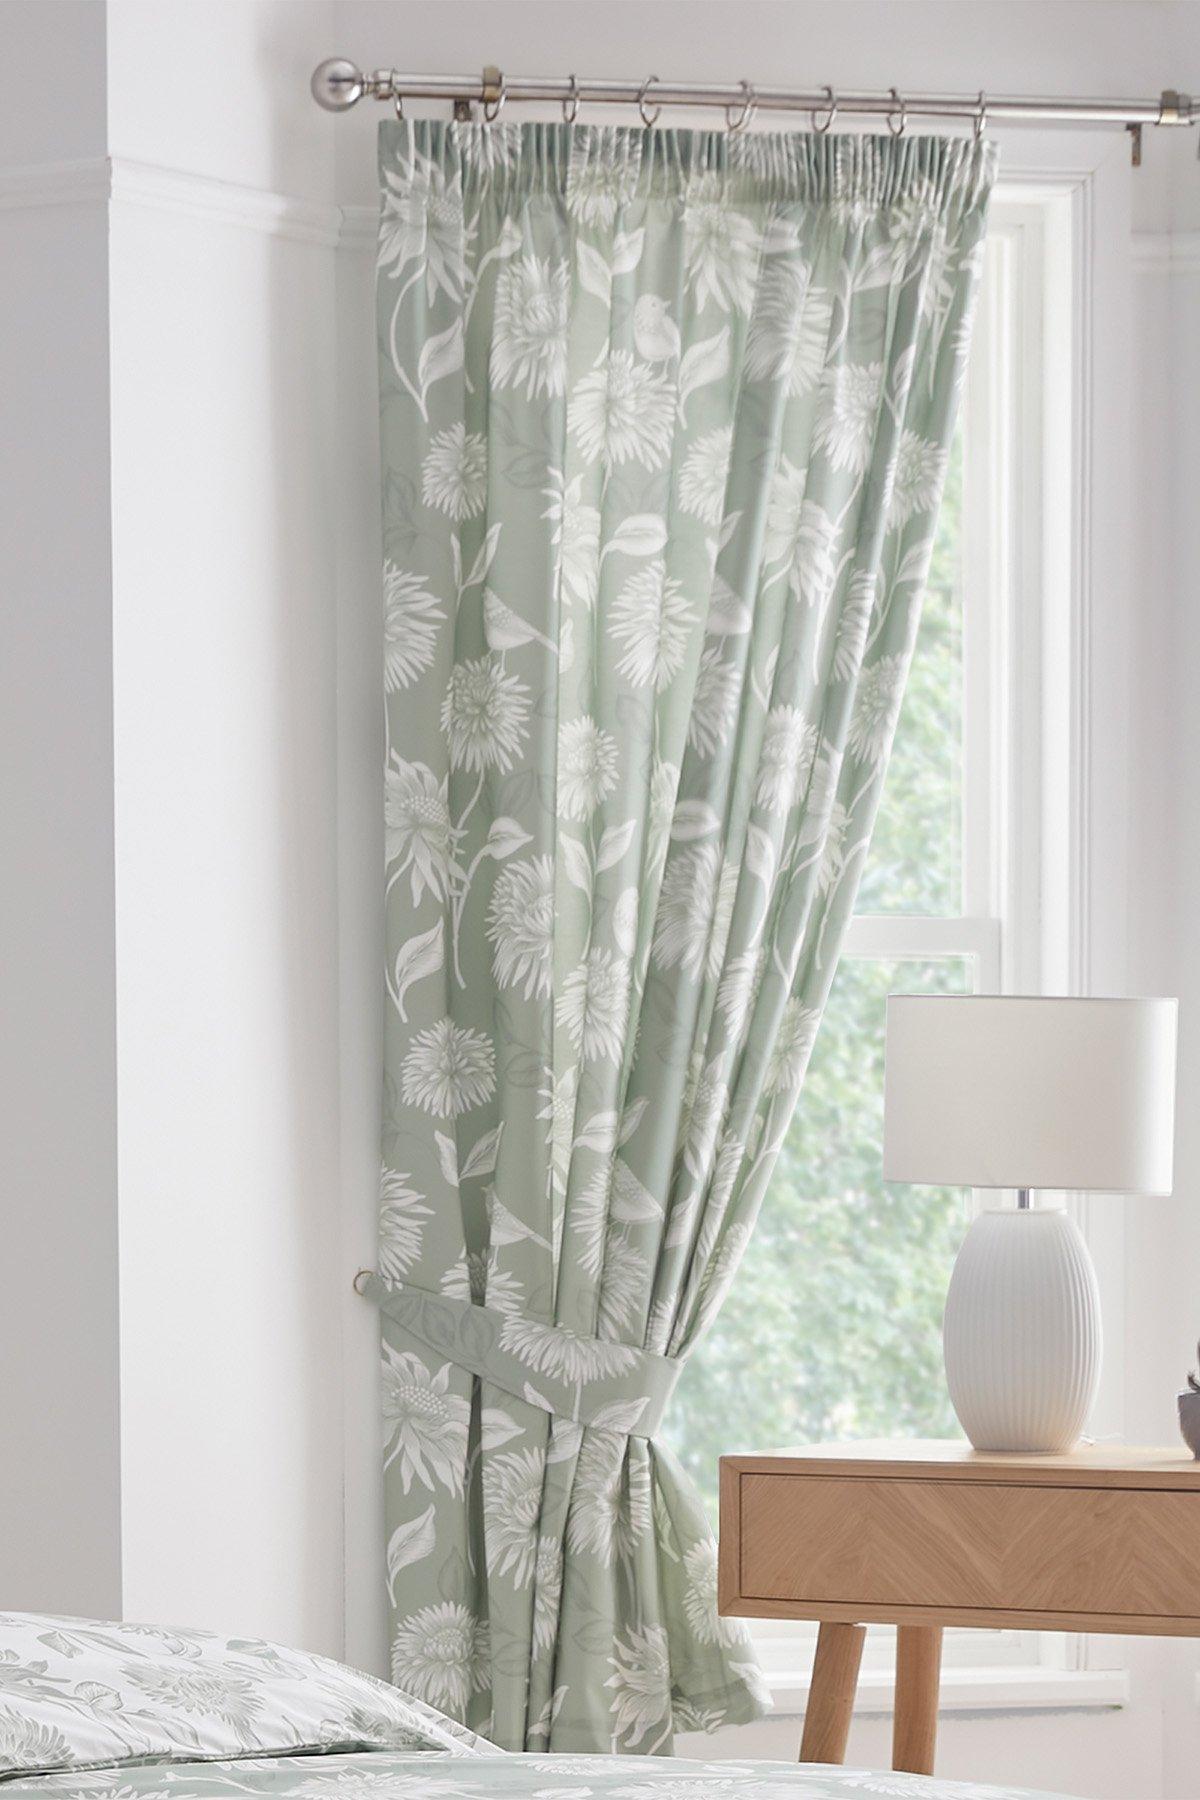 'Chrysanthemum' Lined Pair of Pencil Pleat Curtains With Tie-Backs